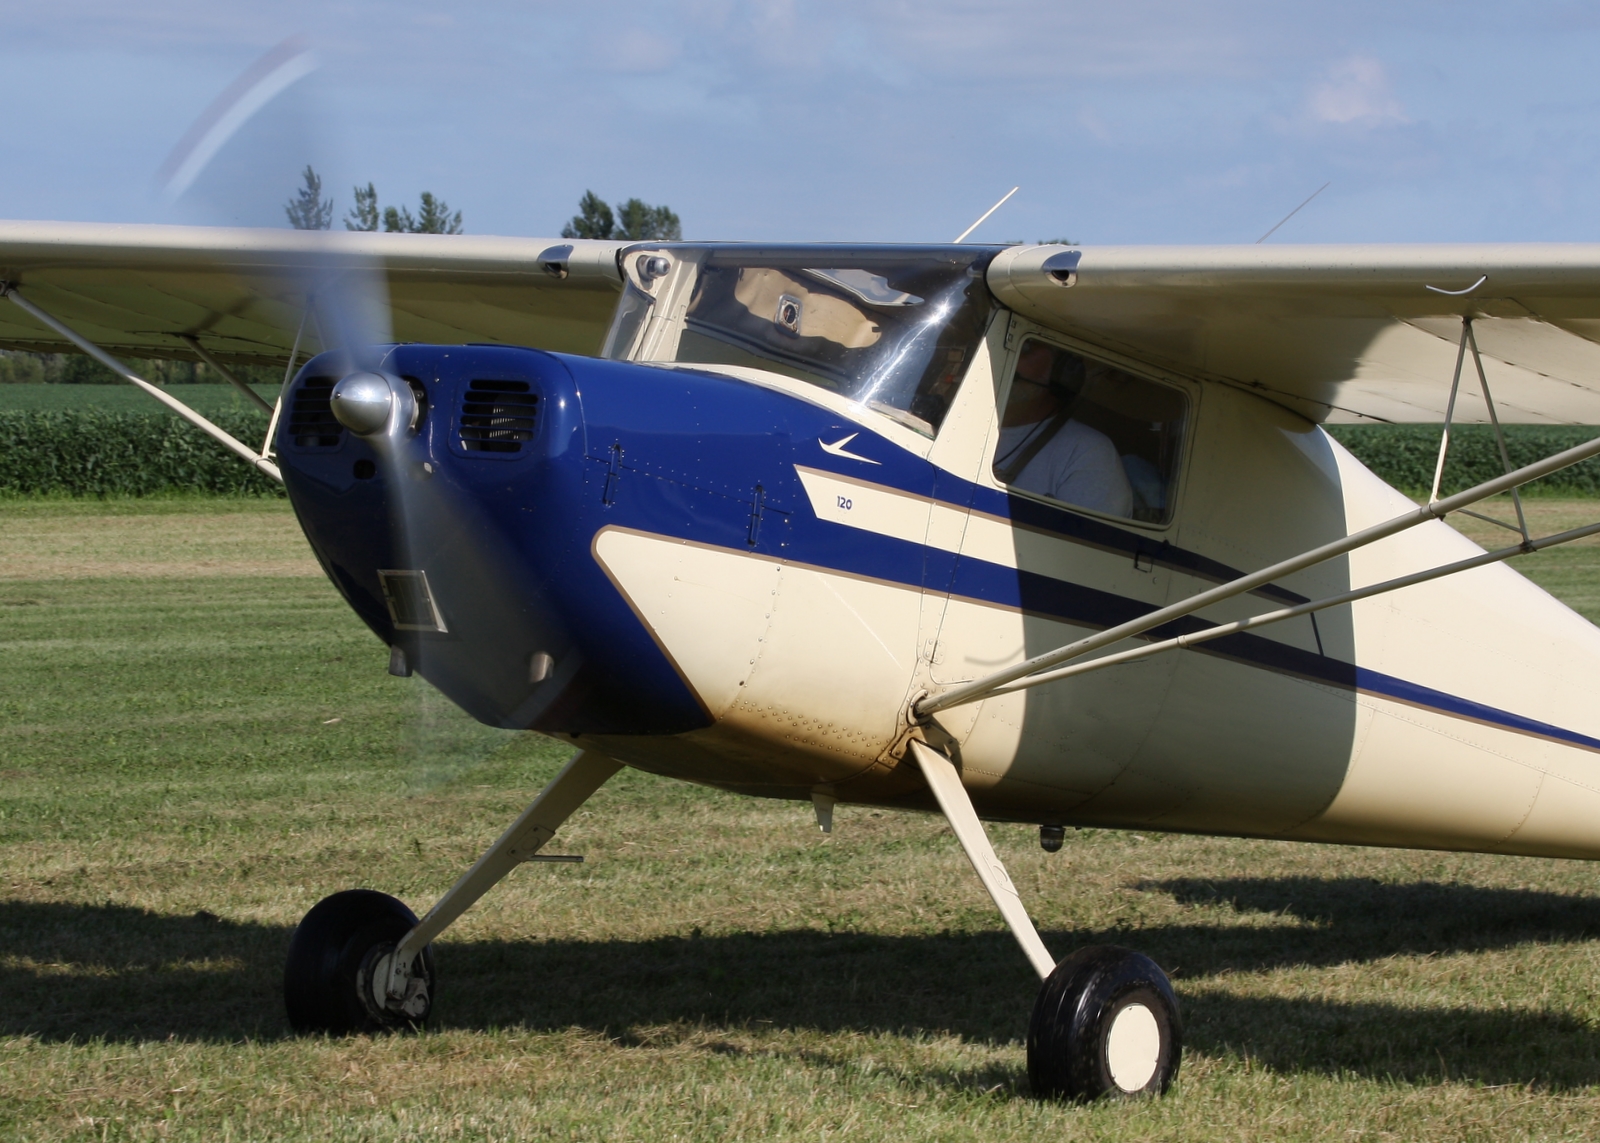 a small, propeller plane on a field with grass